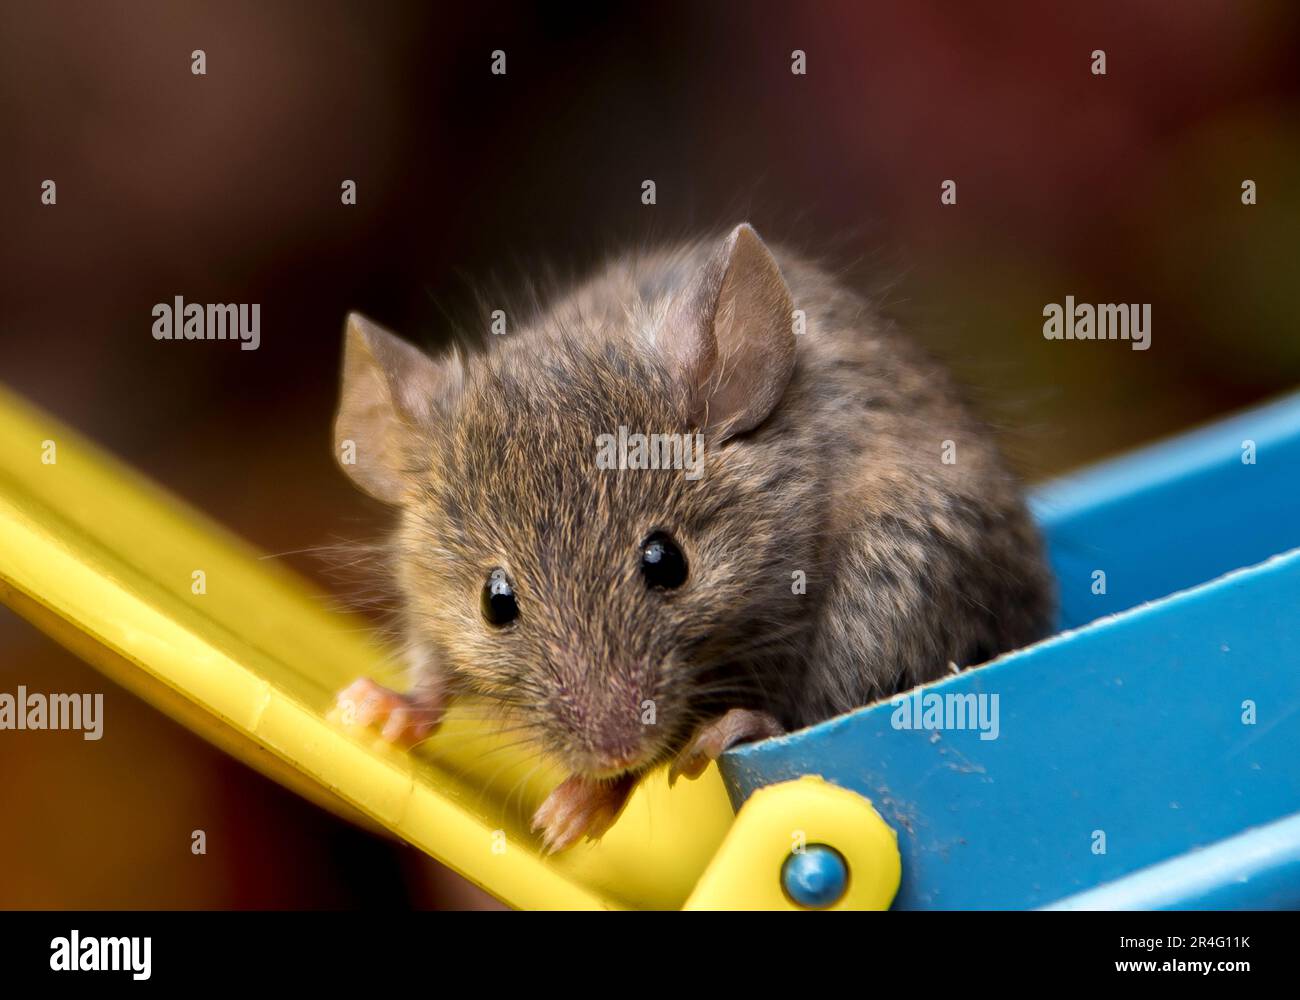 Face of House Mouse, Mus musculus, sniffing the air in garden in Queensland, Australia, being released from humane yellow and blue plastic trap. Stock Photo